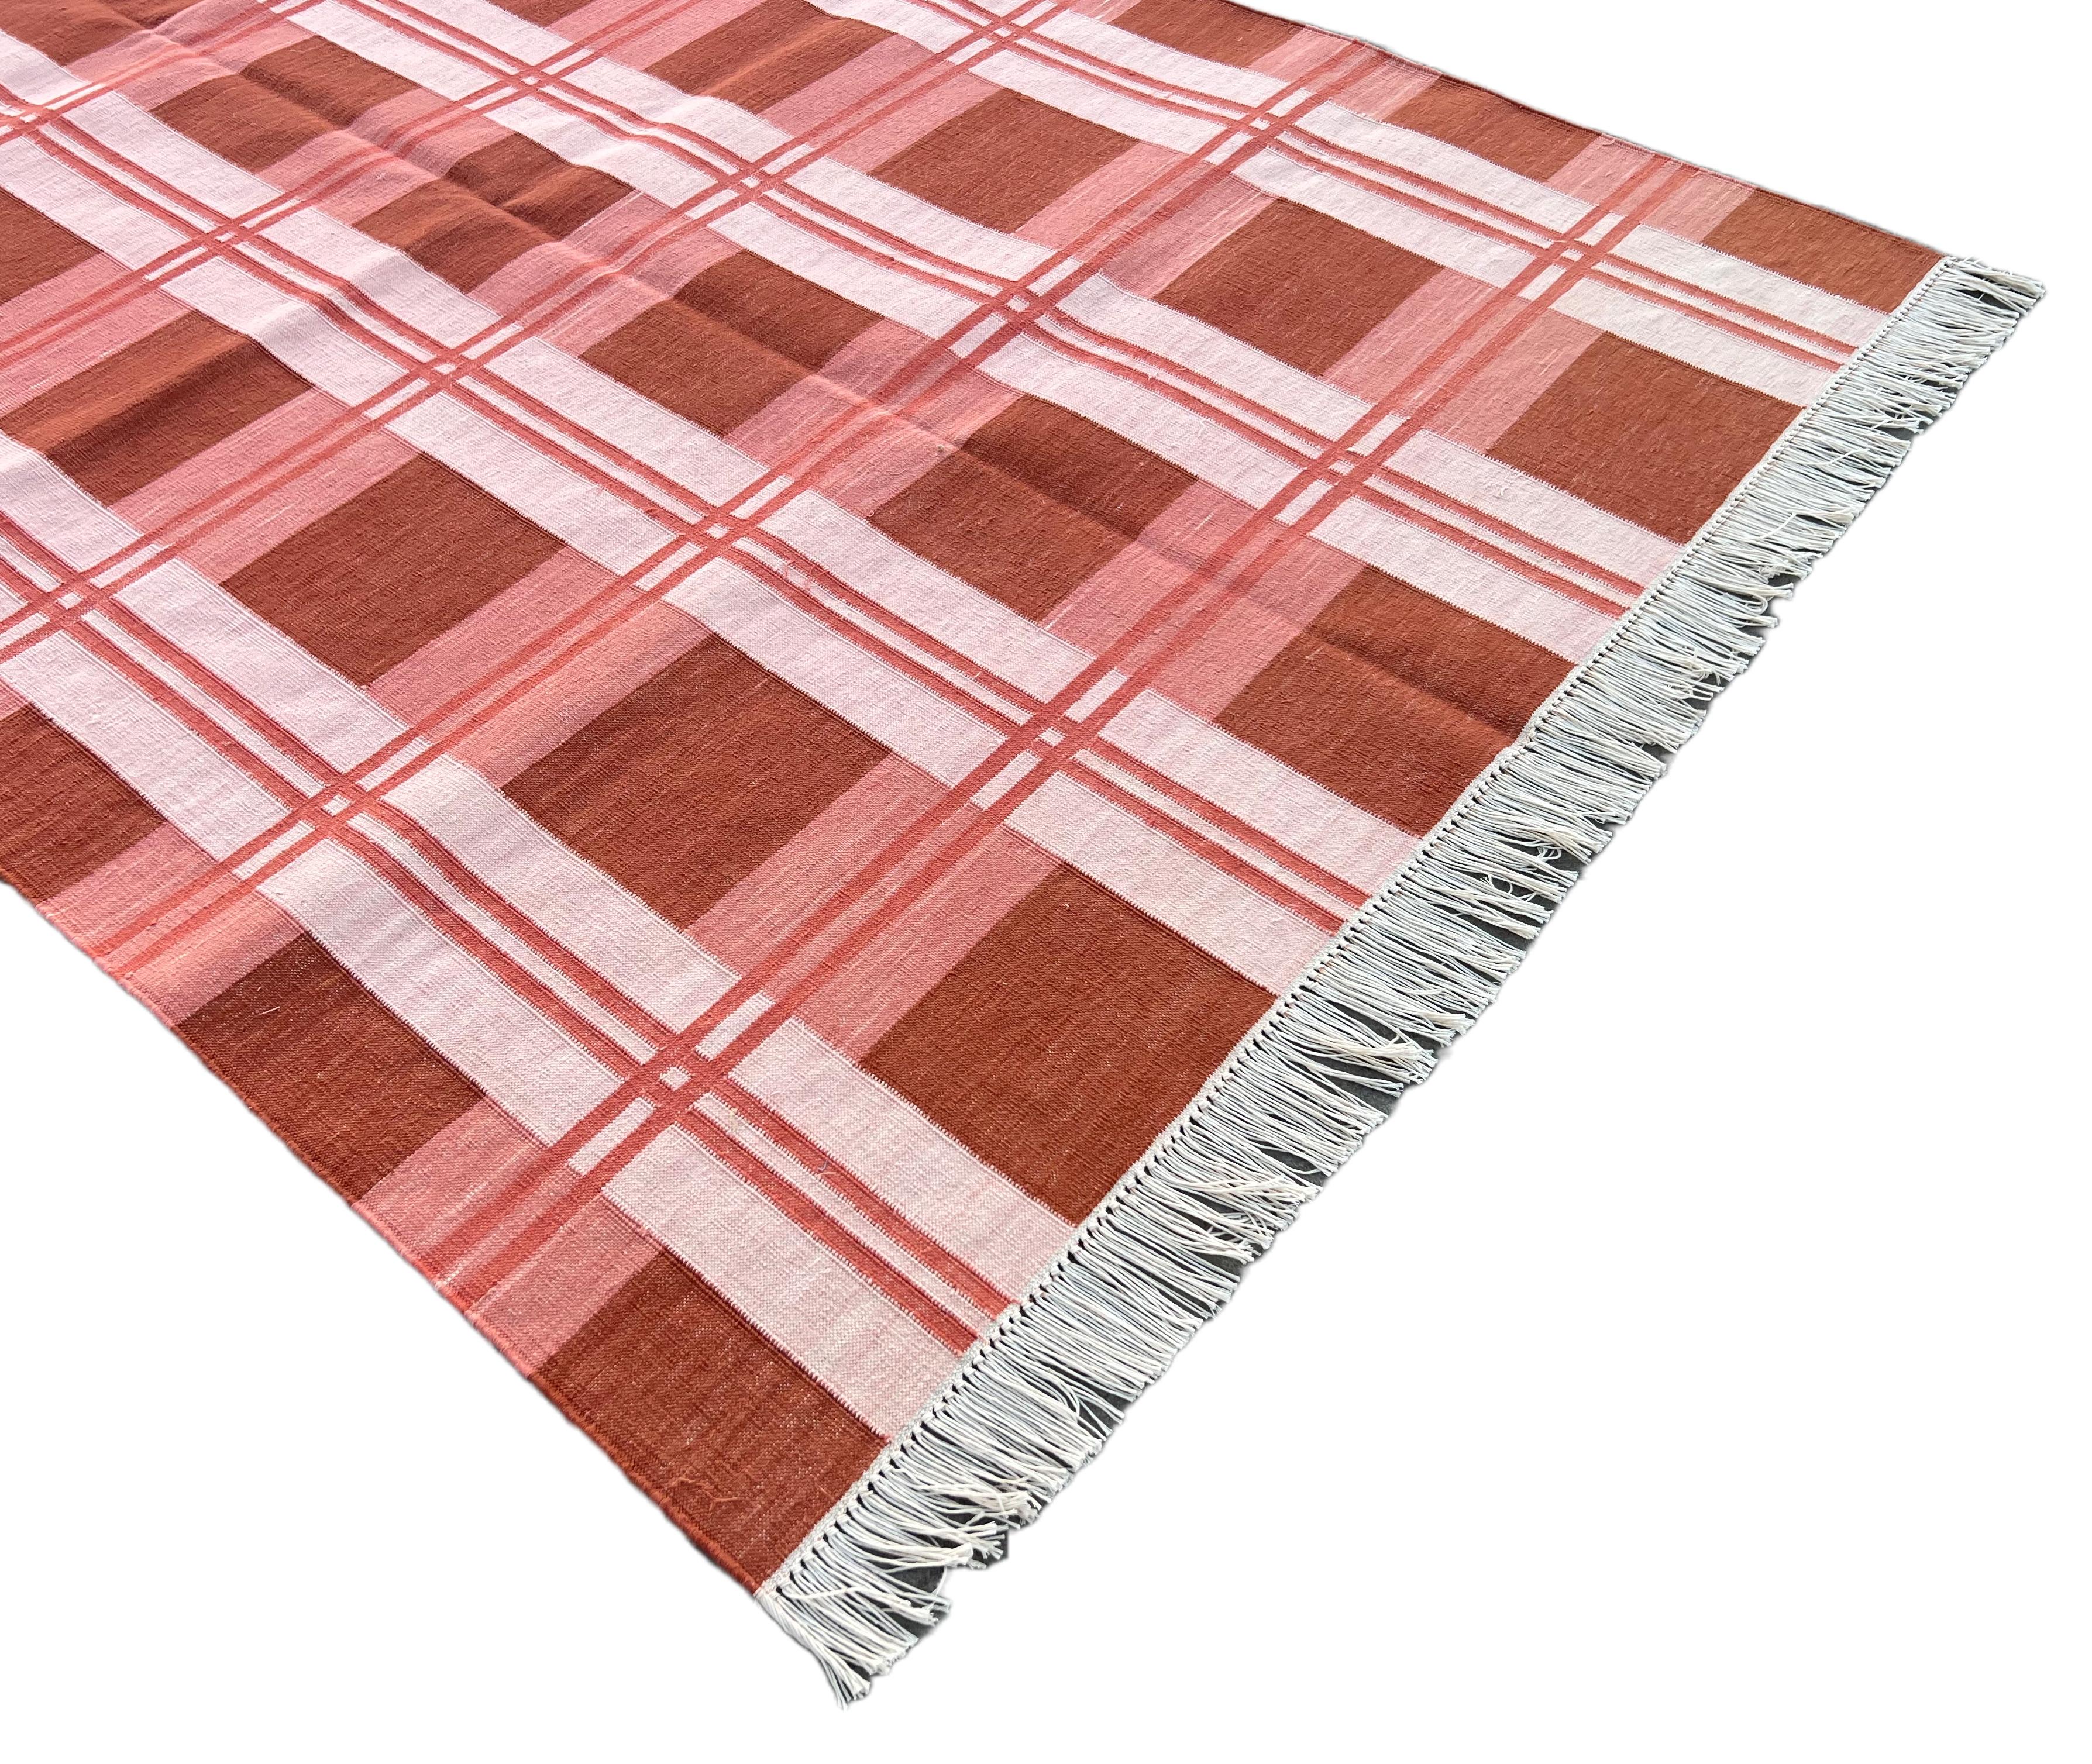 Mid-Century Modern Handmade Cotton Area Flat Weave Rug, 4x6 Red And Pink Checked Indian Dhurrie Rug For Sale